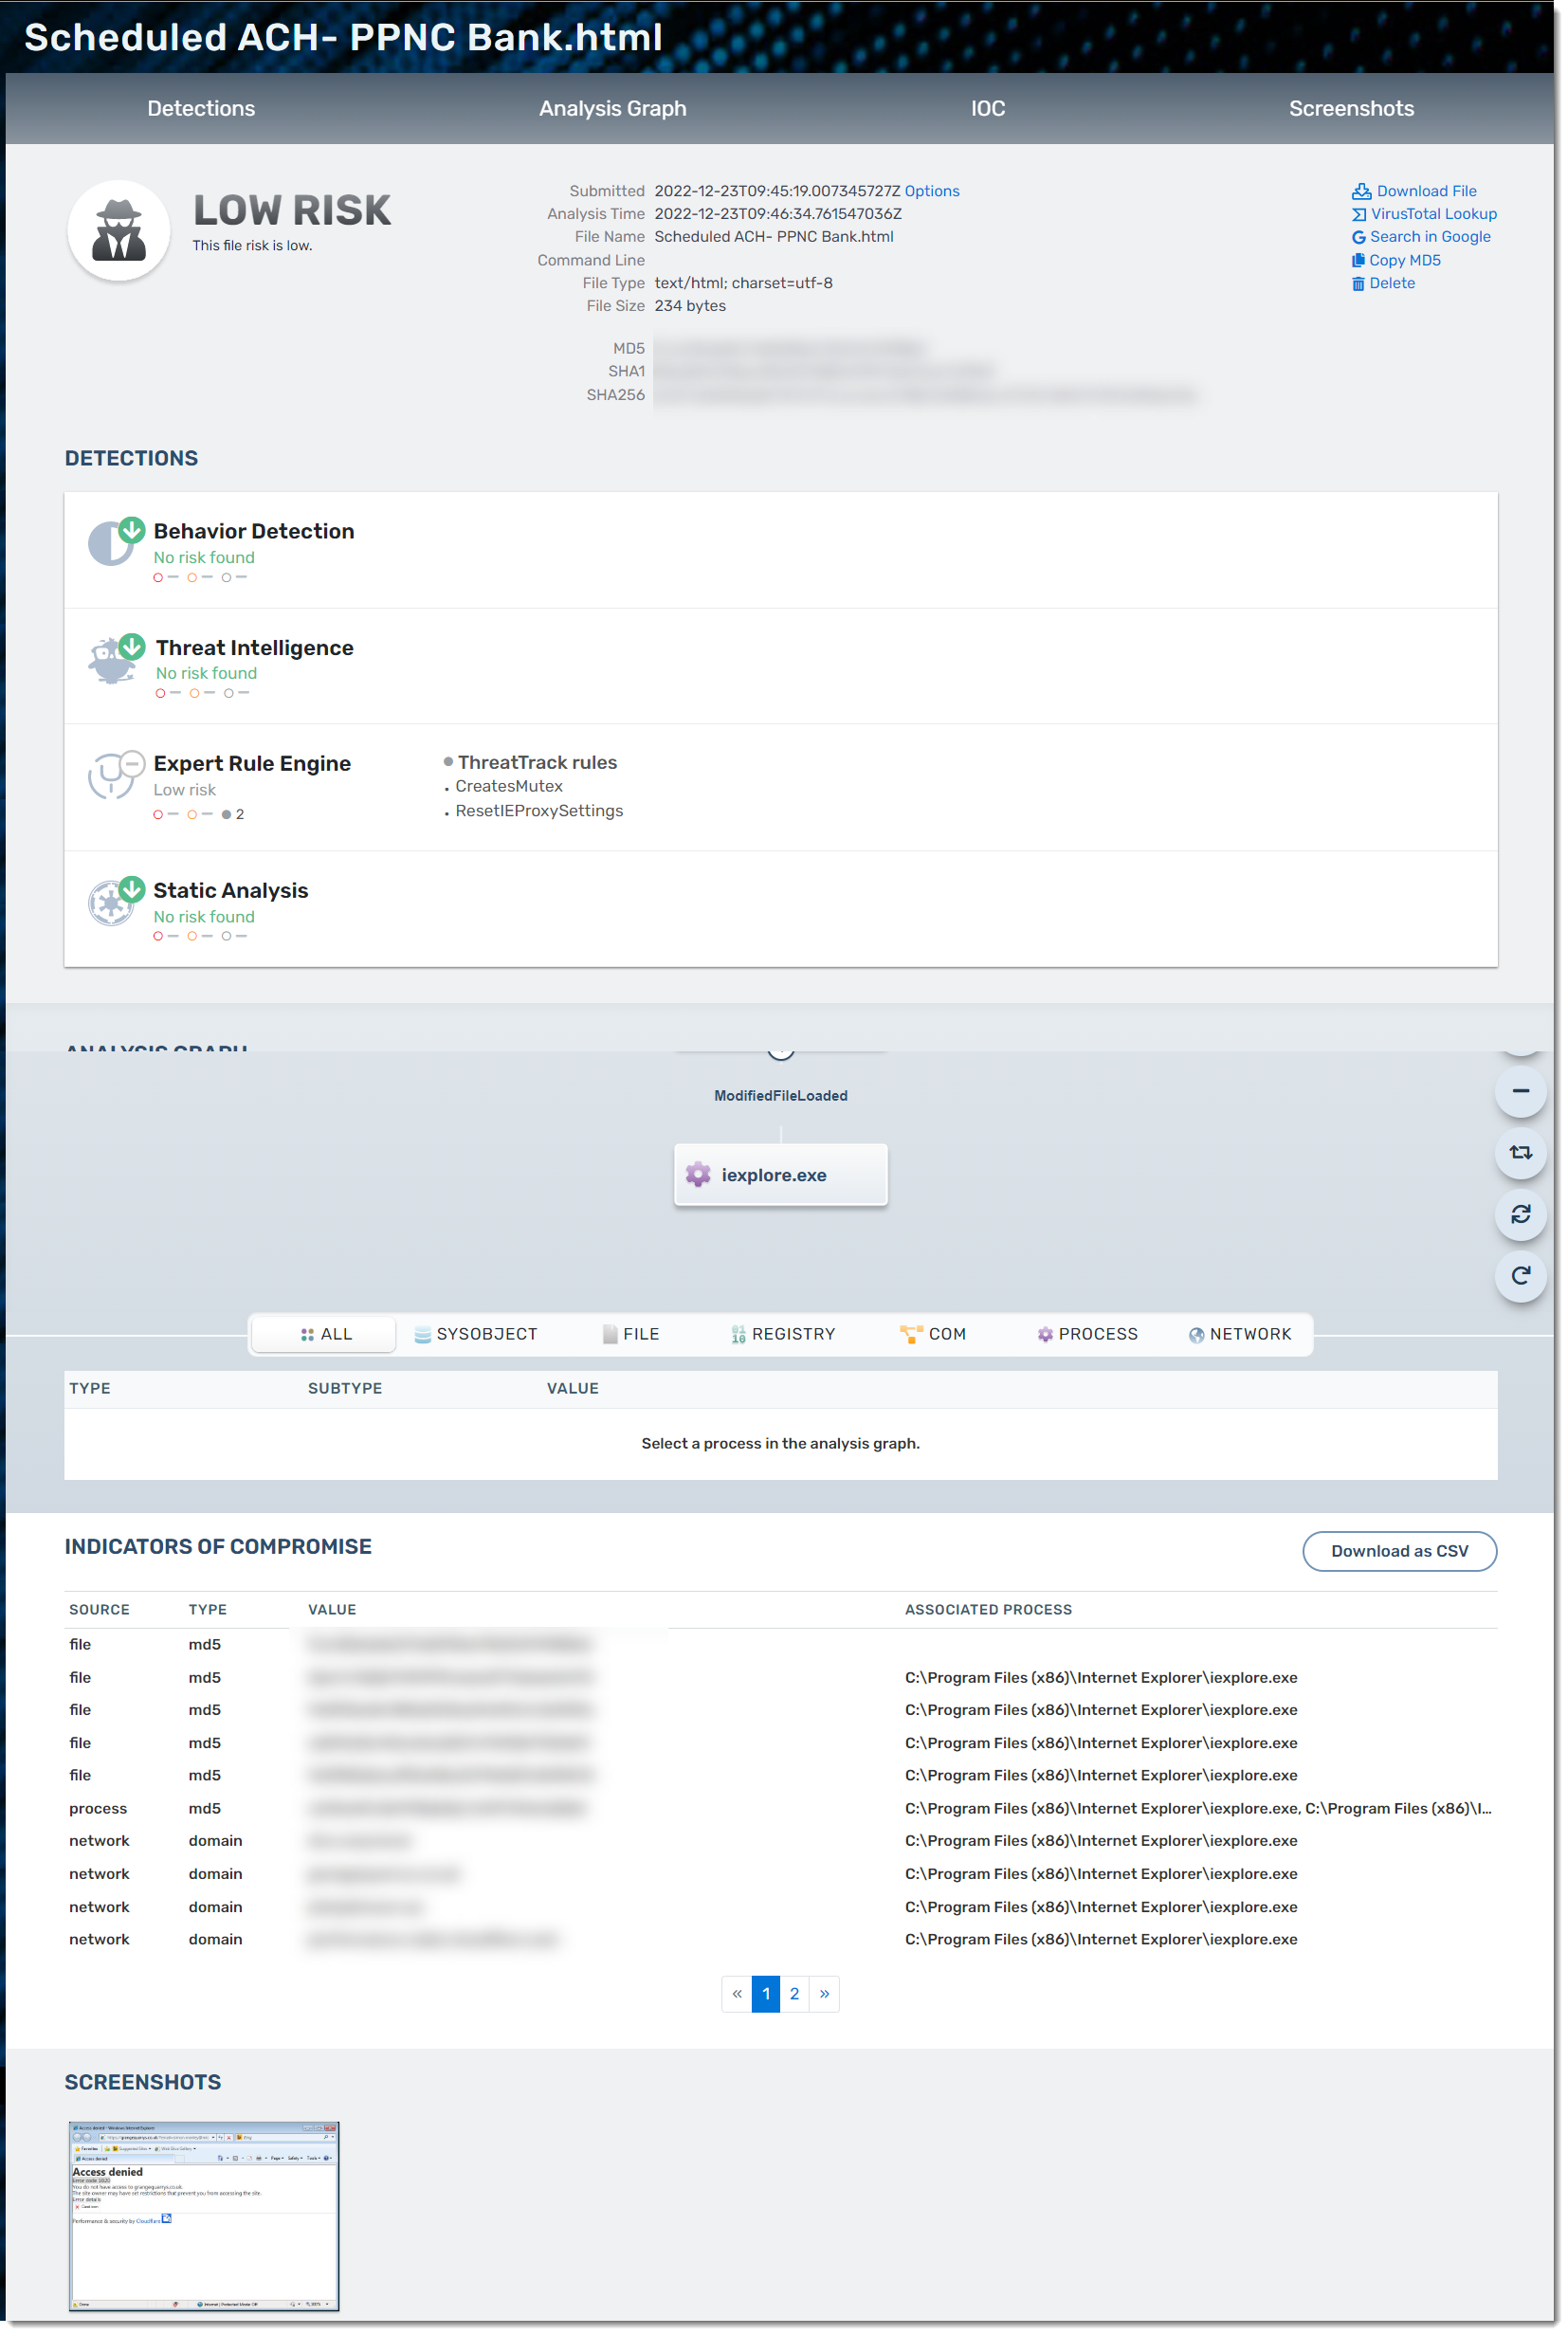 Screenshot: Analyzed File Details including risk level, available actions, threats, graph, and more.